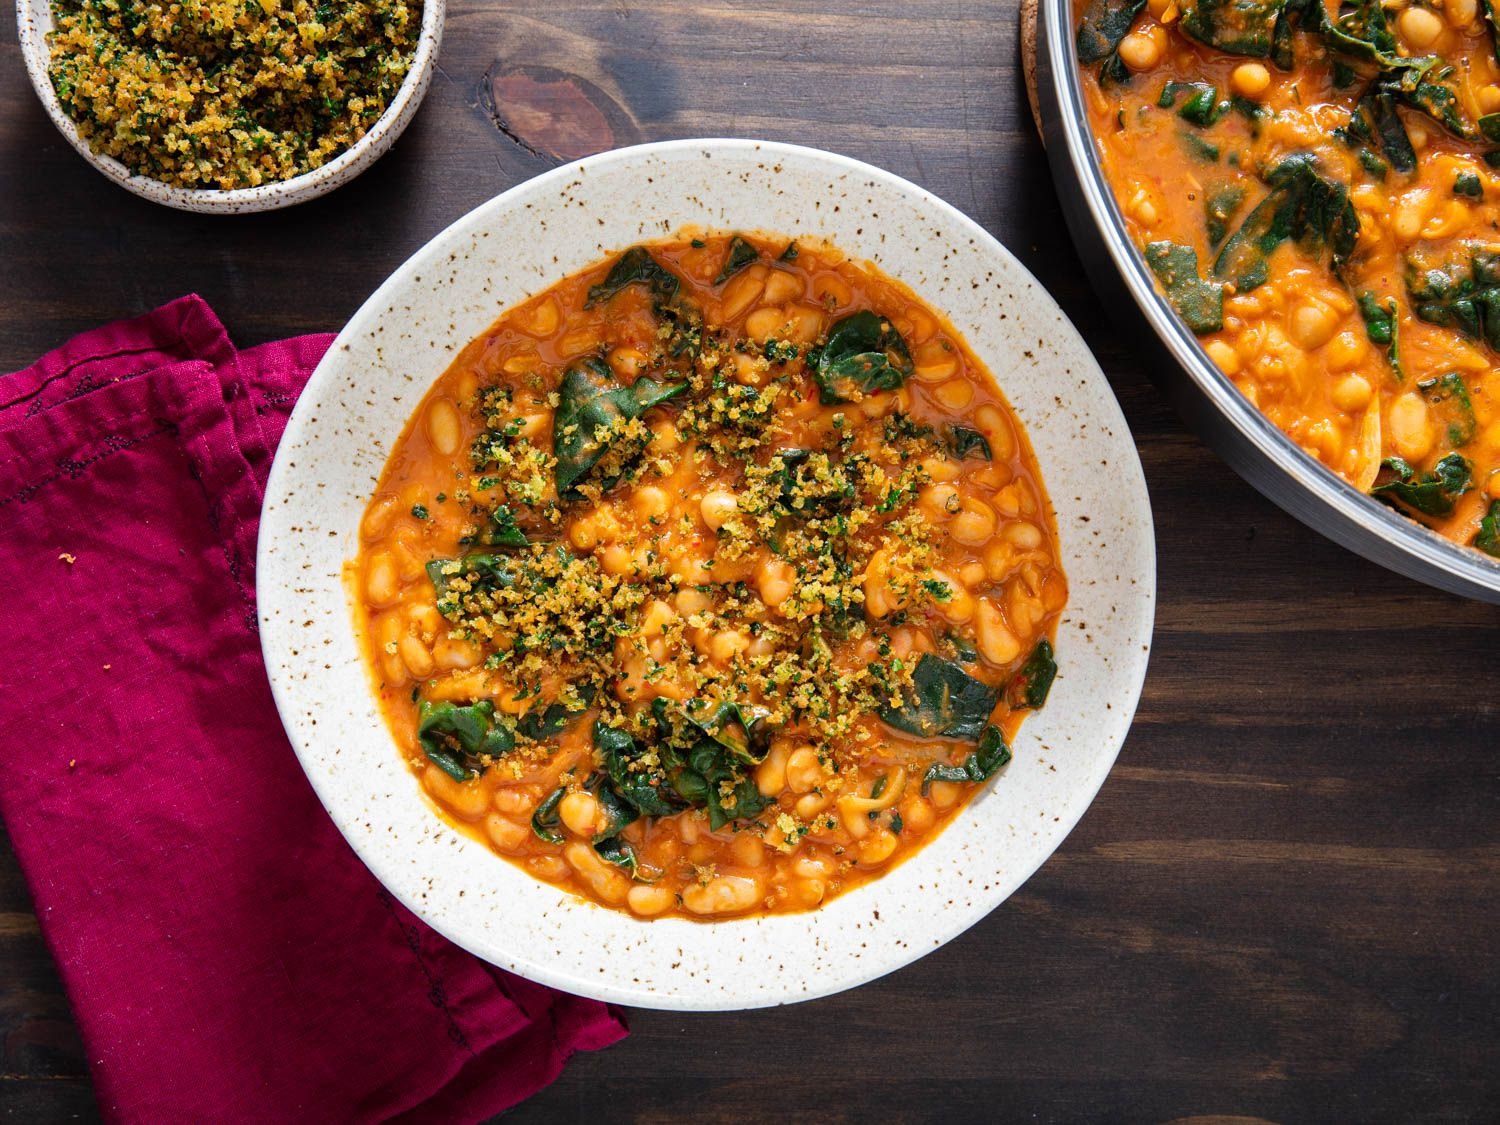 Creamy White Beans With 'Nduja, Kale, and Gremolata Breadcrumbs